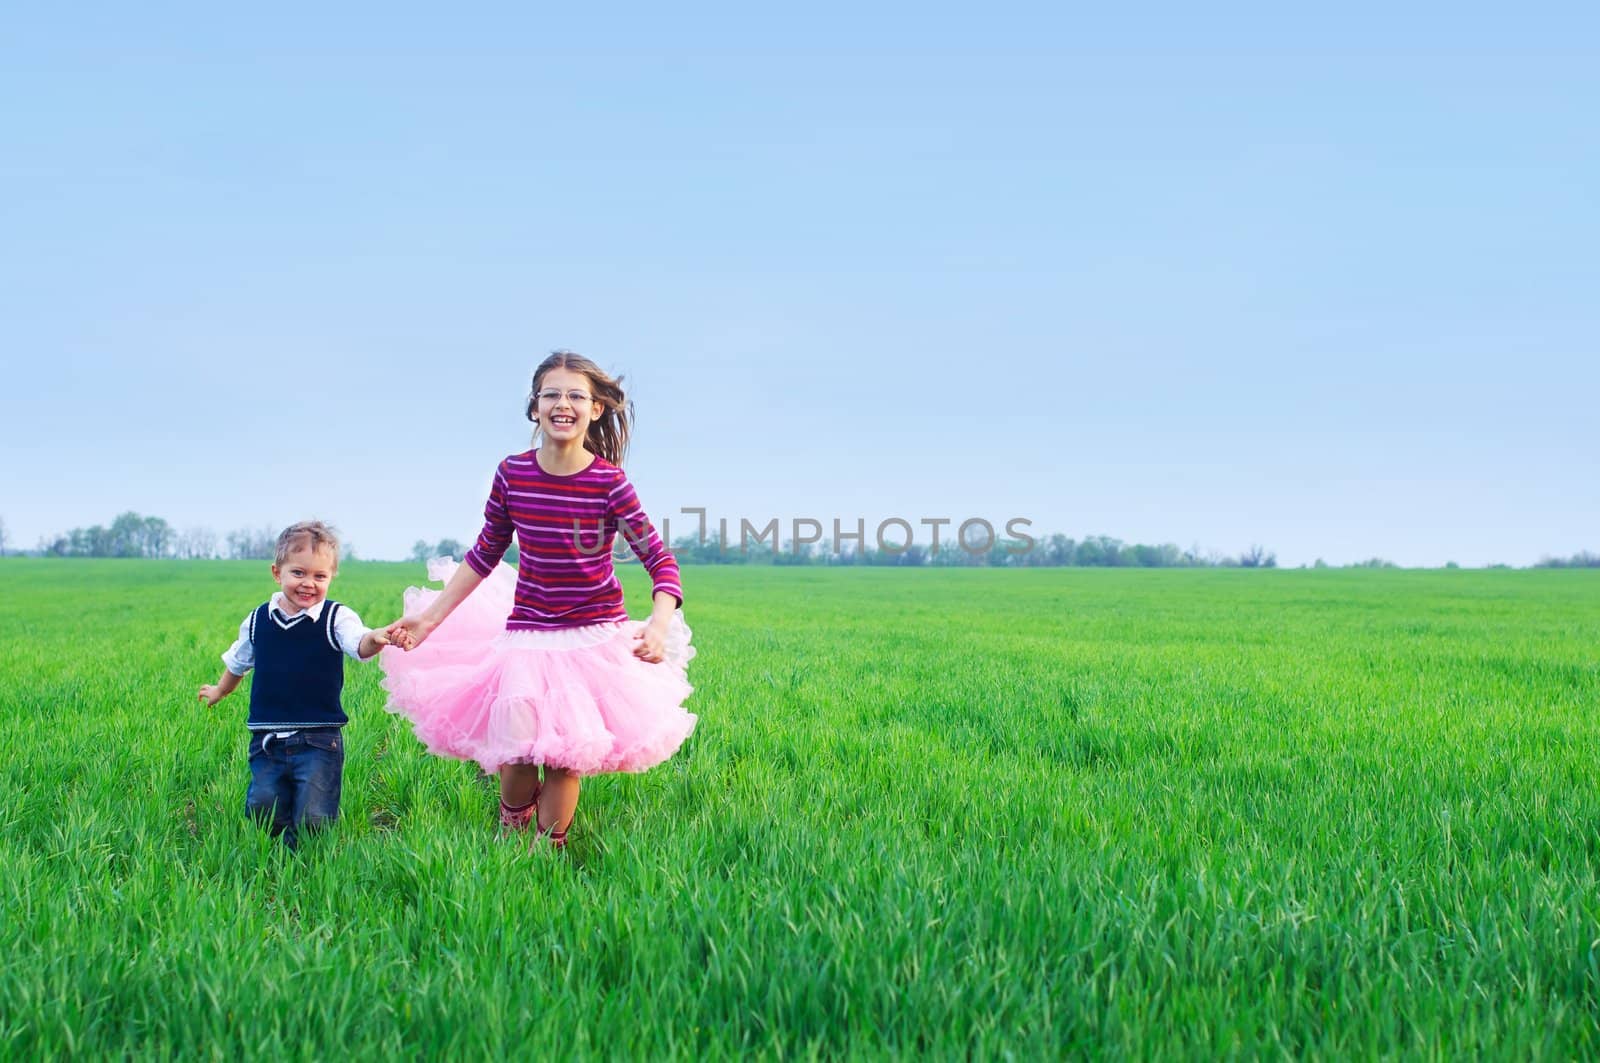 A beautiful sister runing with her cute little brather on the grass